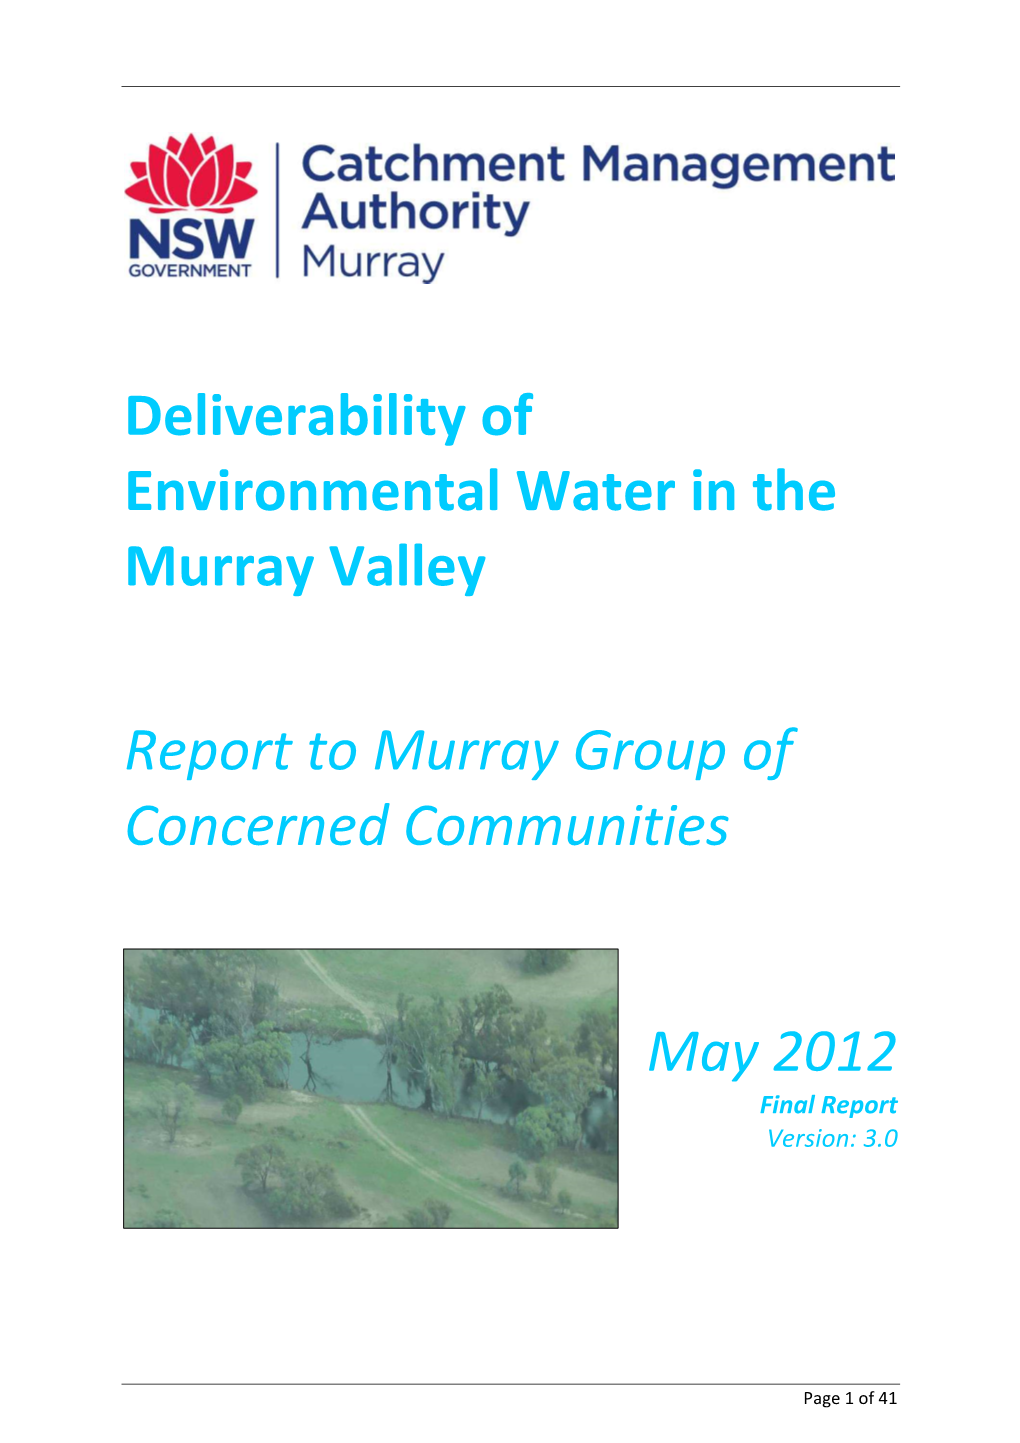 Deliverabiliy of Environmental Water in the Murray Valleyx